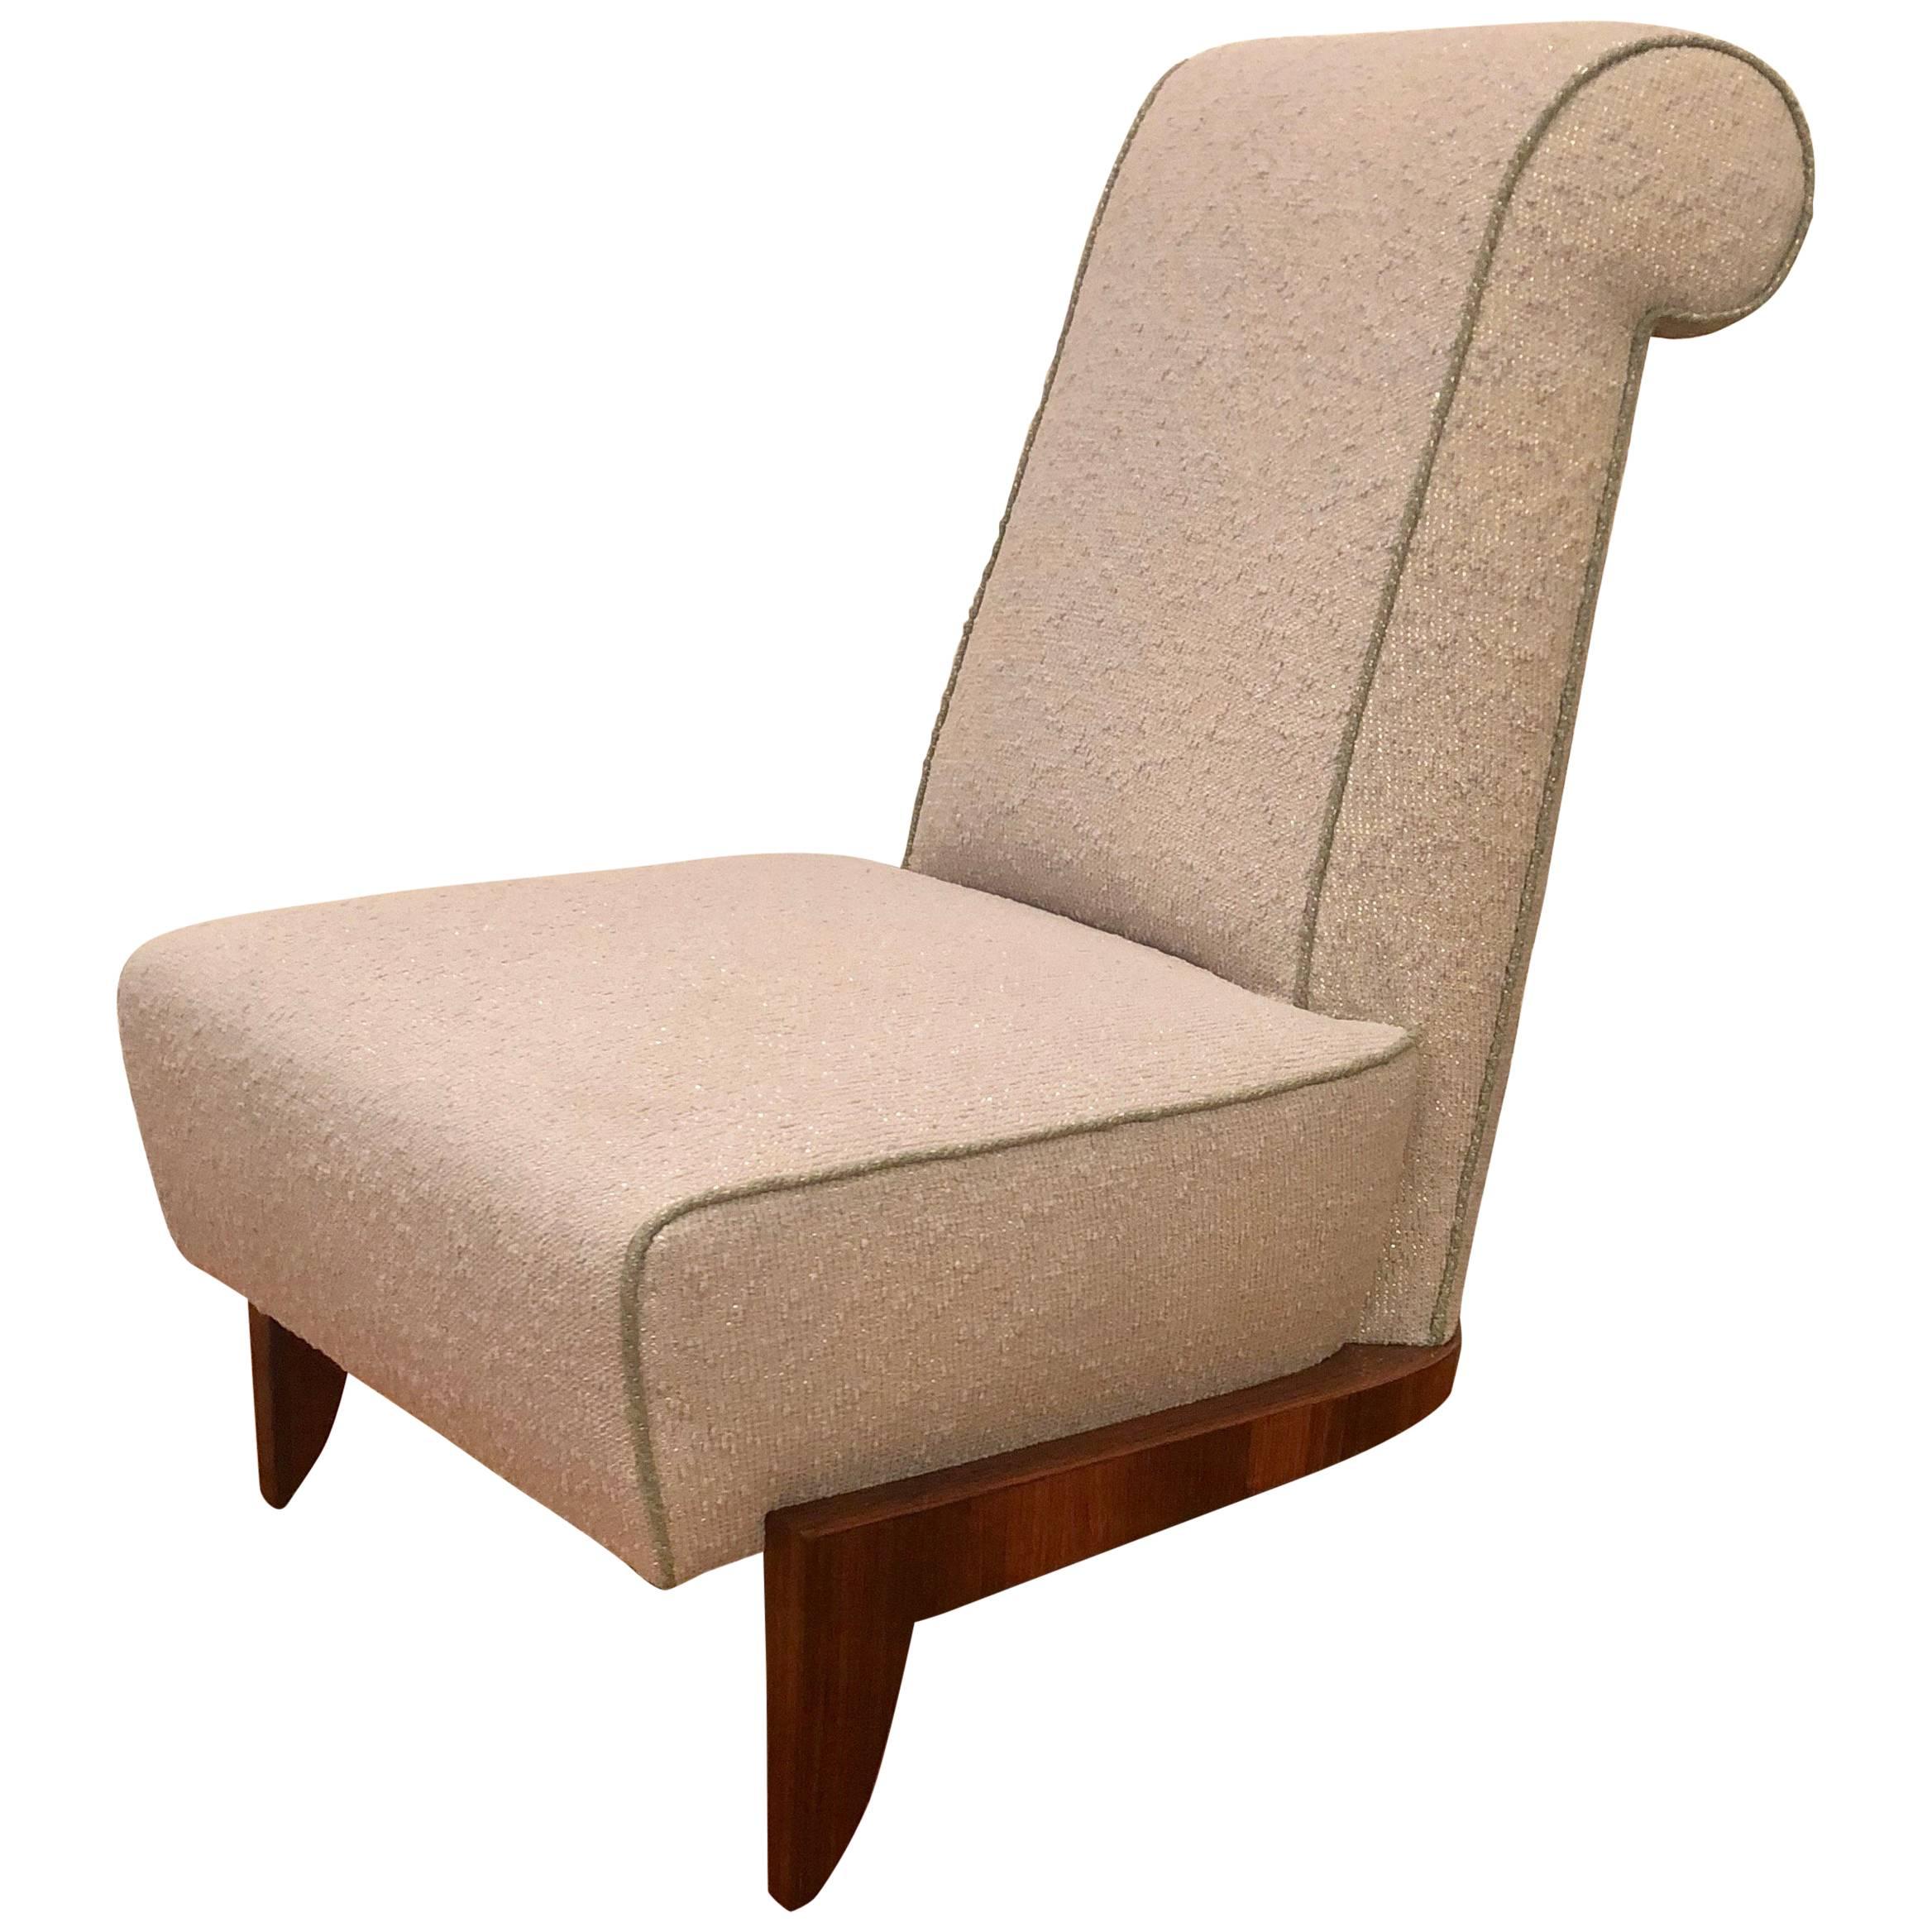 Elegant slipper chair by Dominique with a three-legged varnished palissandre base, an angled back, spring seat, and reupholstered in an excellently preserved 1950s nubby, woven fabric with golden metallic detail, and welting in the same fabric in